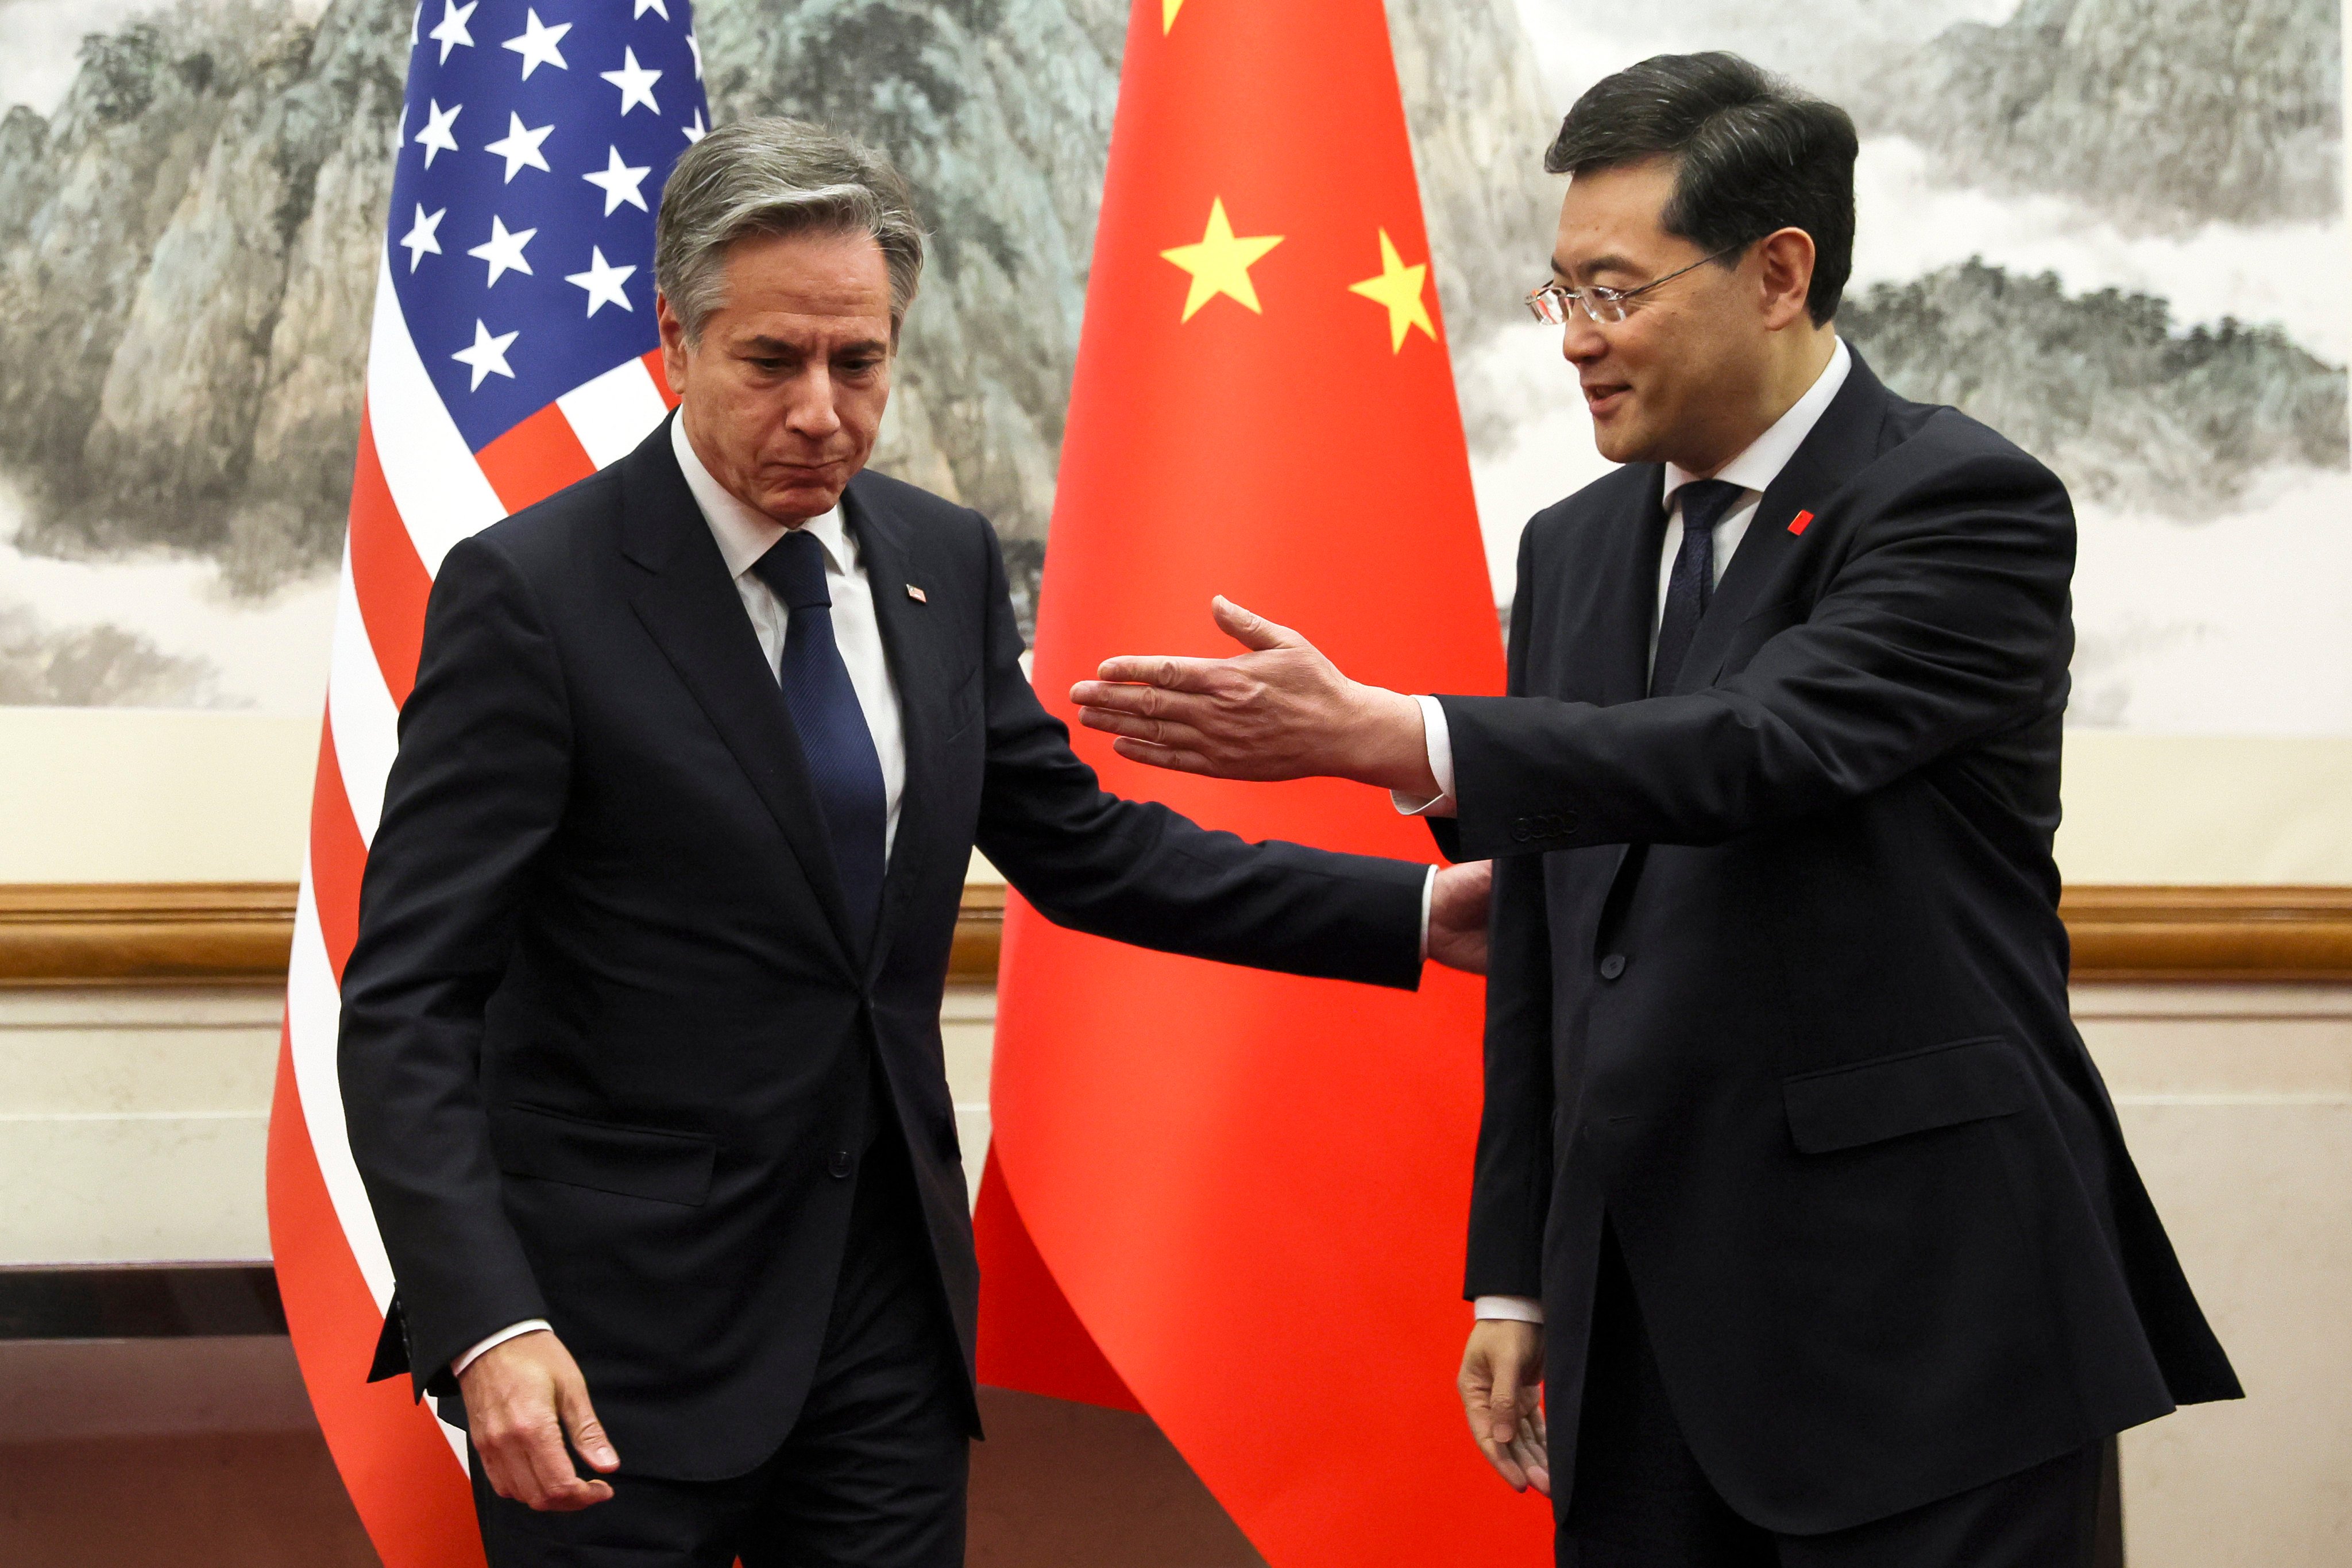 US Secretary of State Antony Blinken meets with Chinese Foreign Minister Qin Gang at the Diaoyutai State Guesthouse in Beijing, on June 18. Photo: Pool via AP